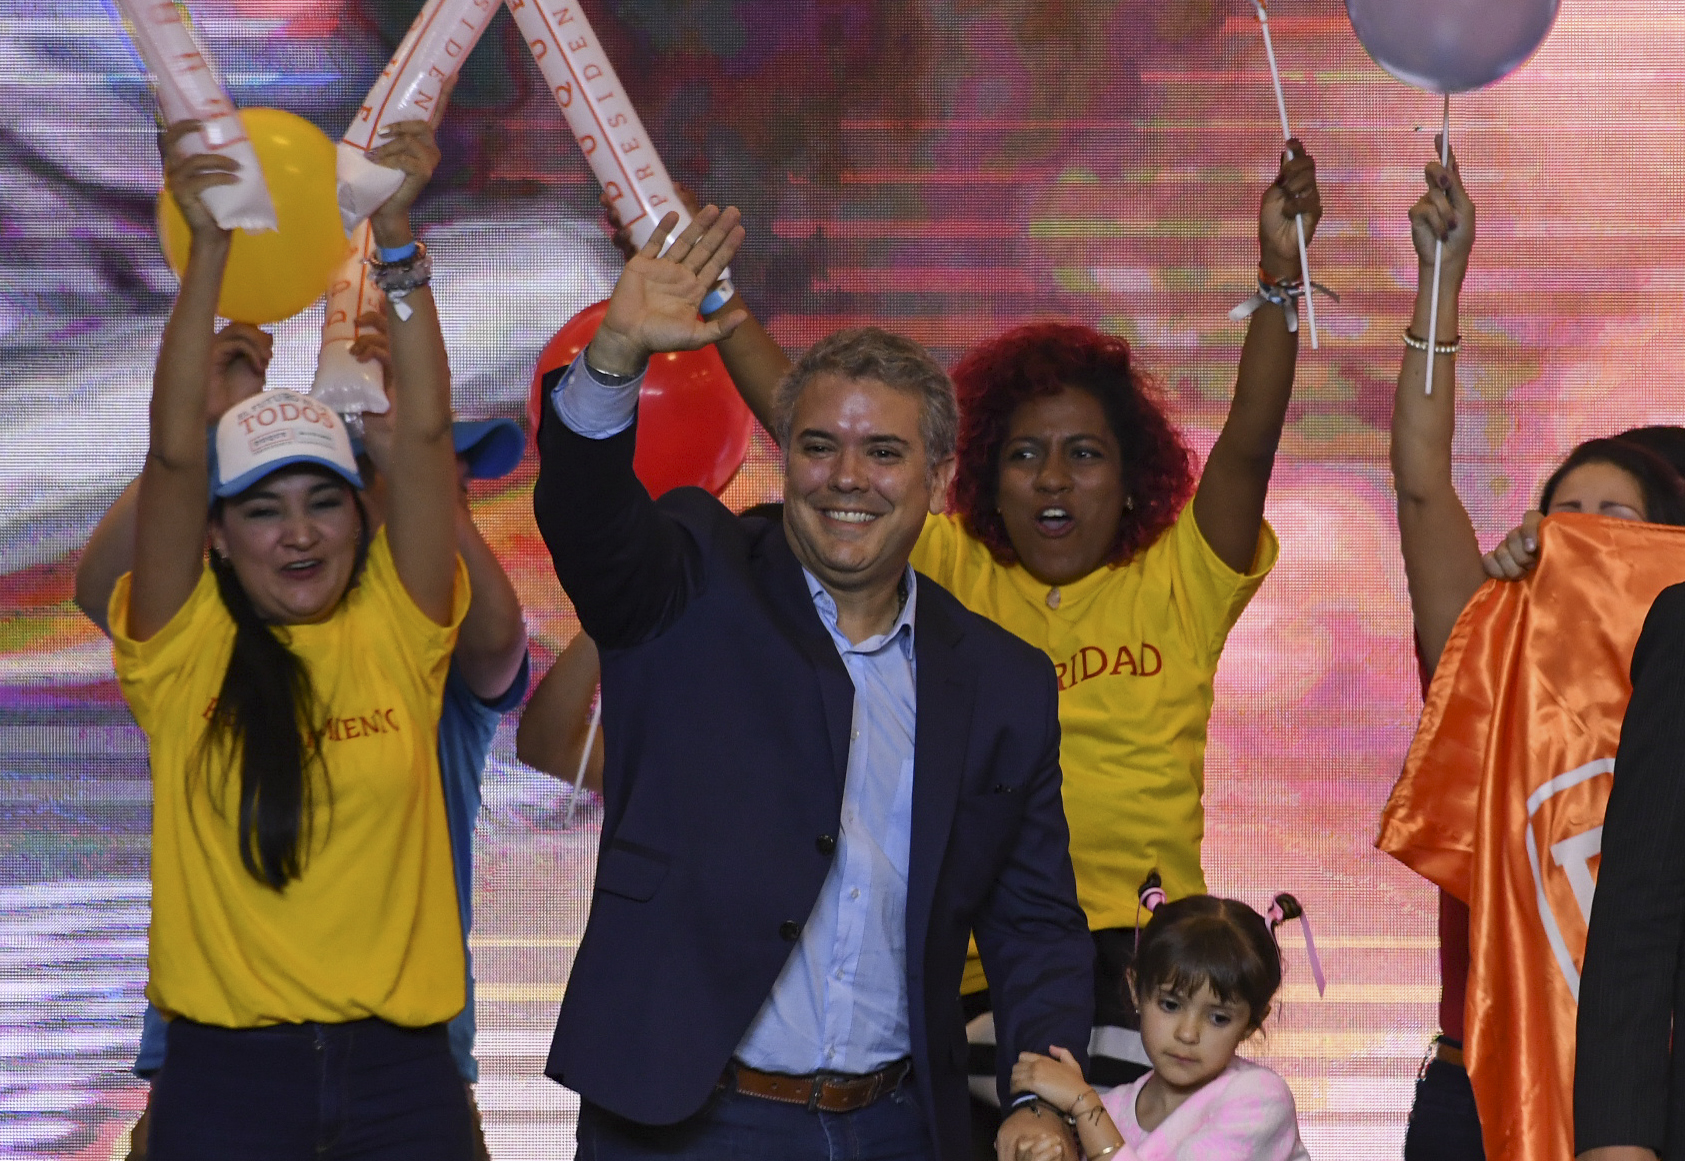 Colombian presidential candidate Ivan Duque, for the Democratic Centre party, holds his daughter's hand, as he waves to supporters in Bogota, after winning the first round of the Colombian presidential election on May 27, 2018. (Luis Acosta – AFP/Getty Images)